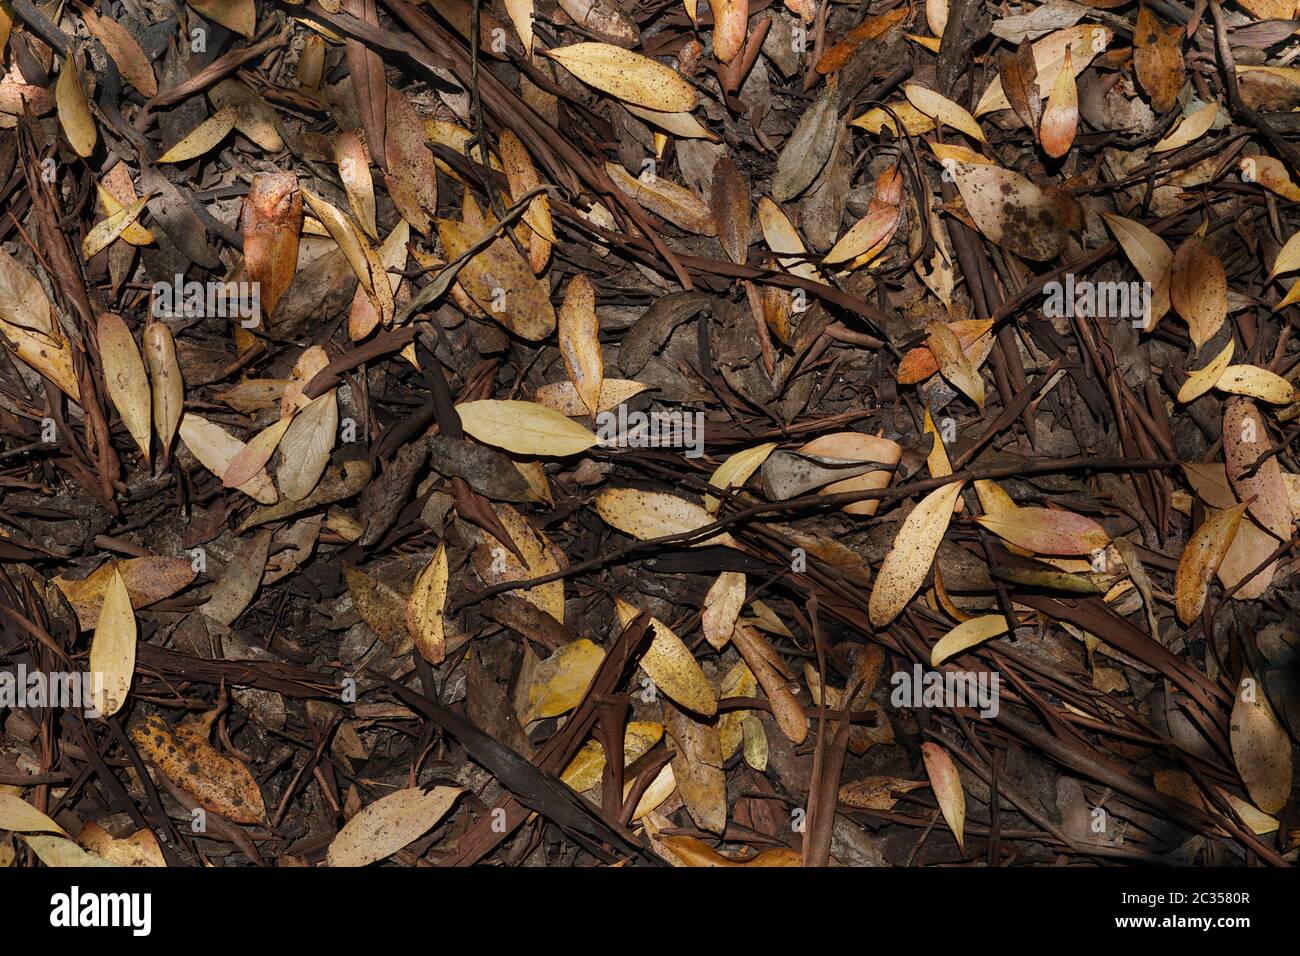 Colorful leaf litter with twigs and bark on the ground in a small woods; yellow and brown predominate. Organic, background, textured surface, fallen. Stock Photo